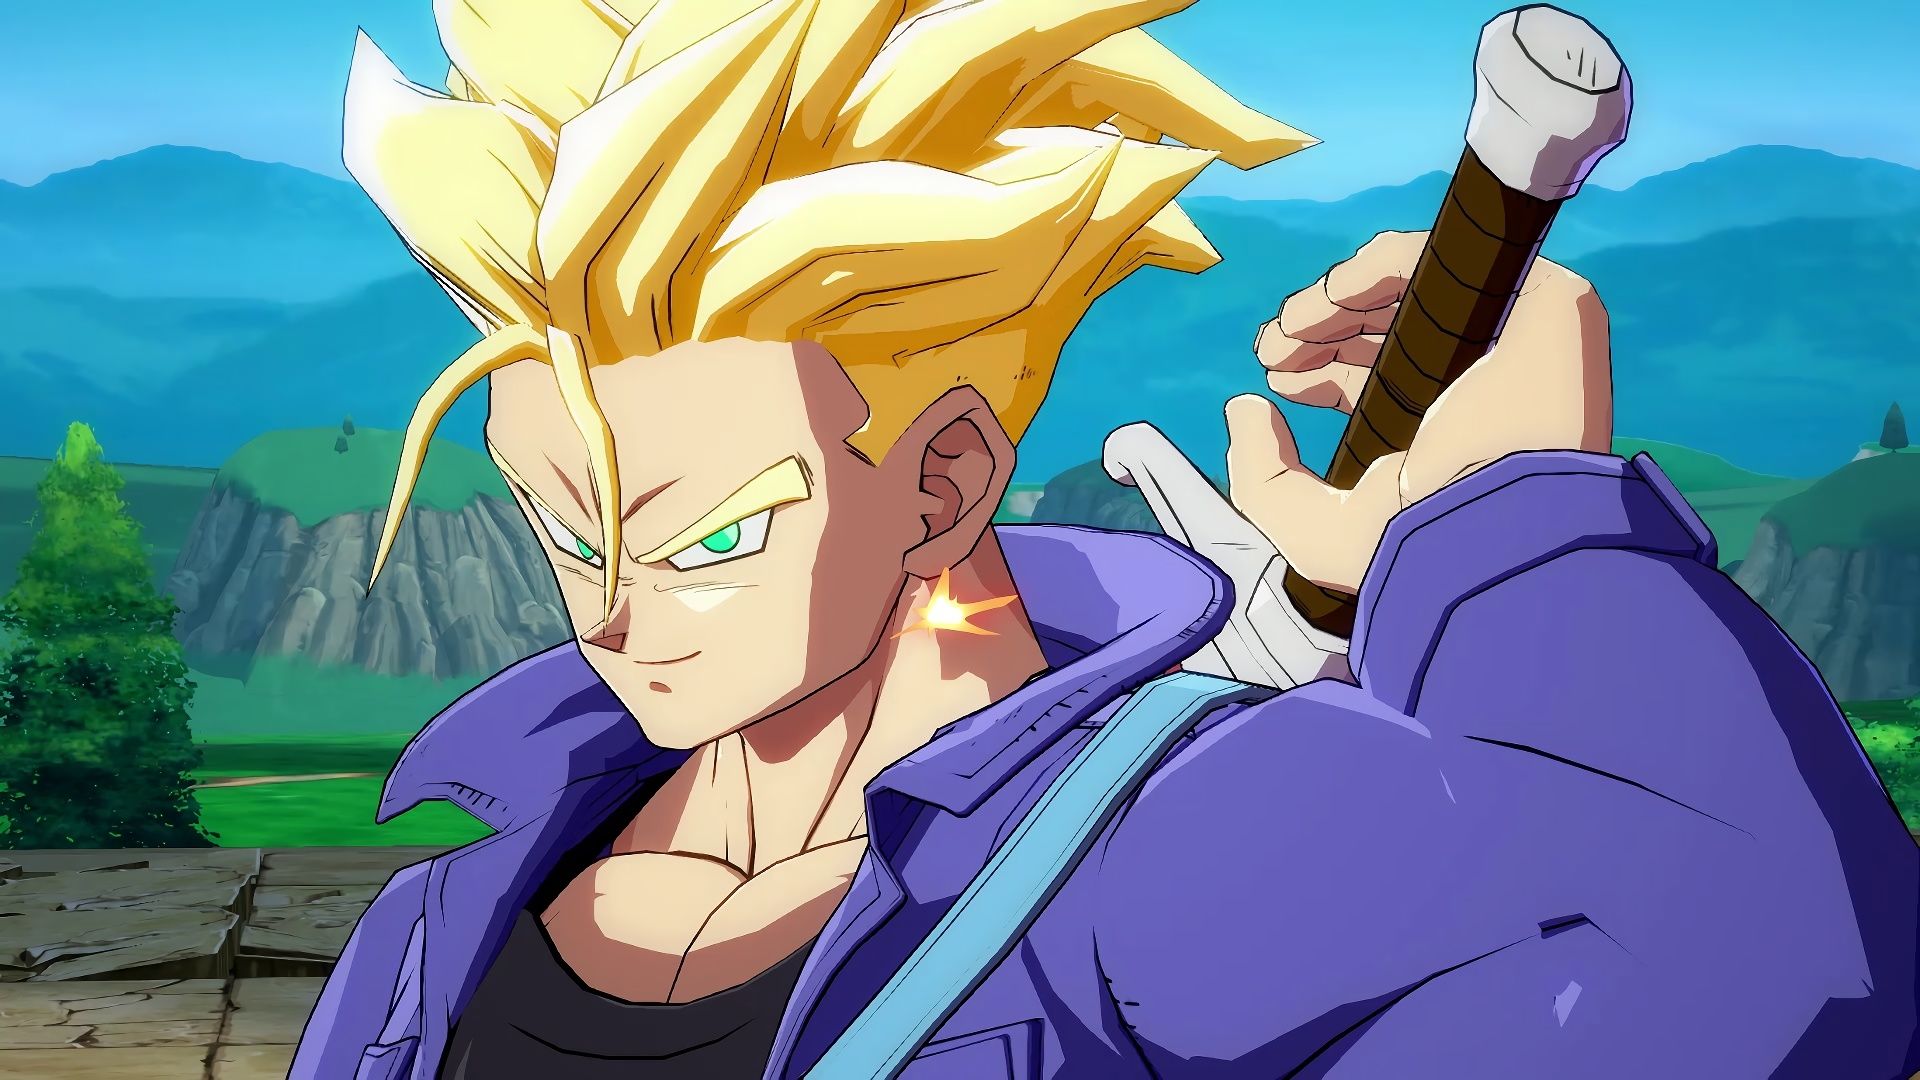 Trunks in Dragon Ball FighterZ